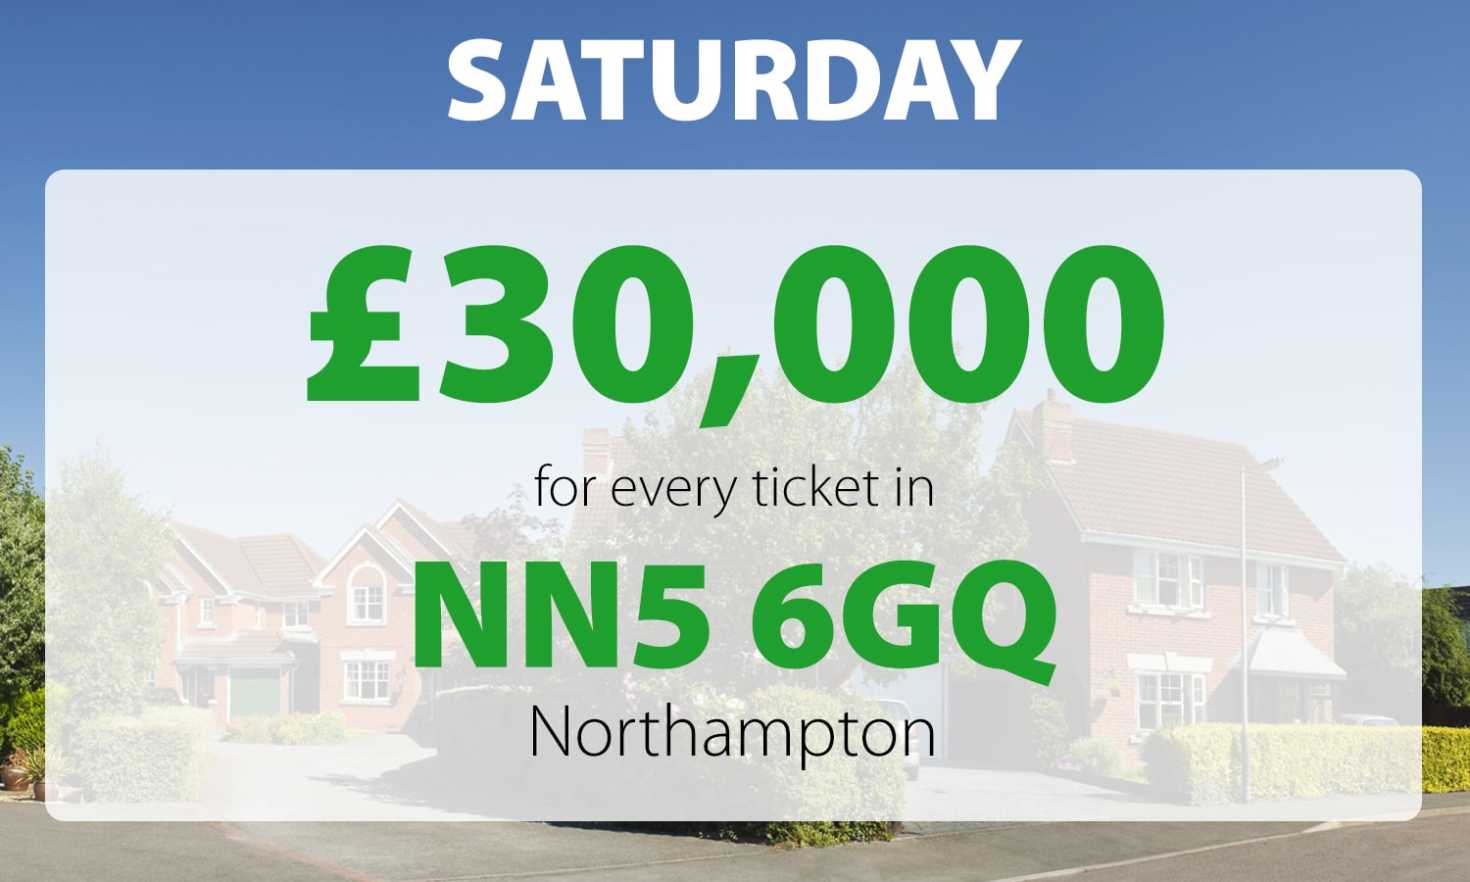 One lucky winner in postcode NN5 6GQ won our £30,000 Saturday Street Prize